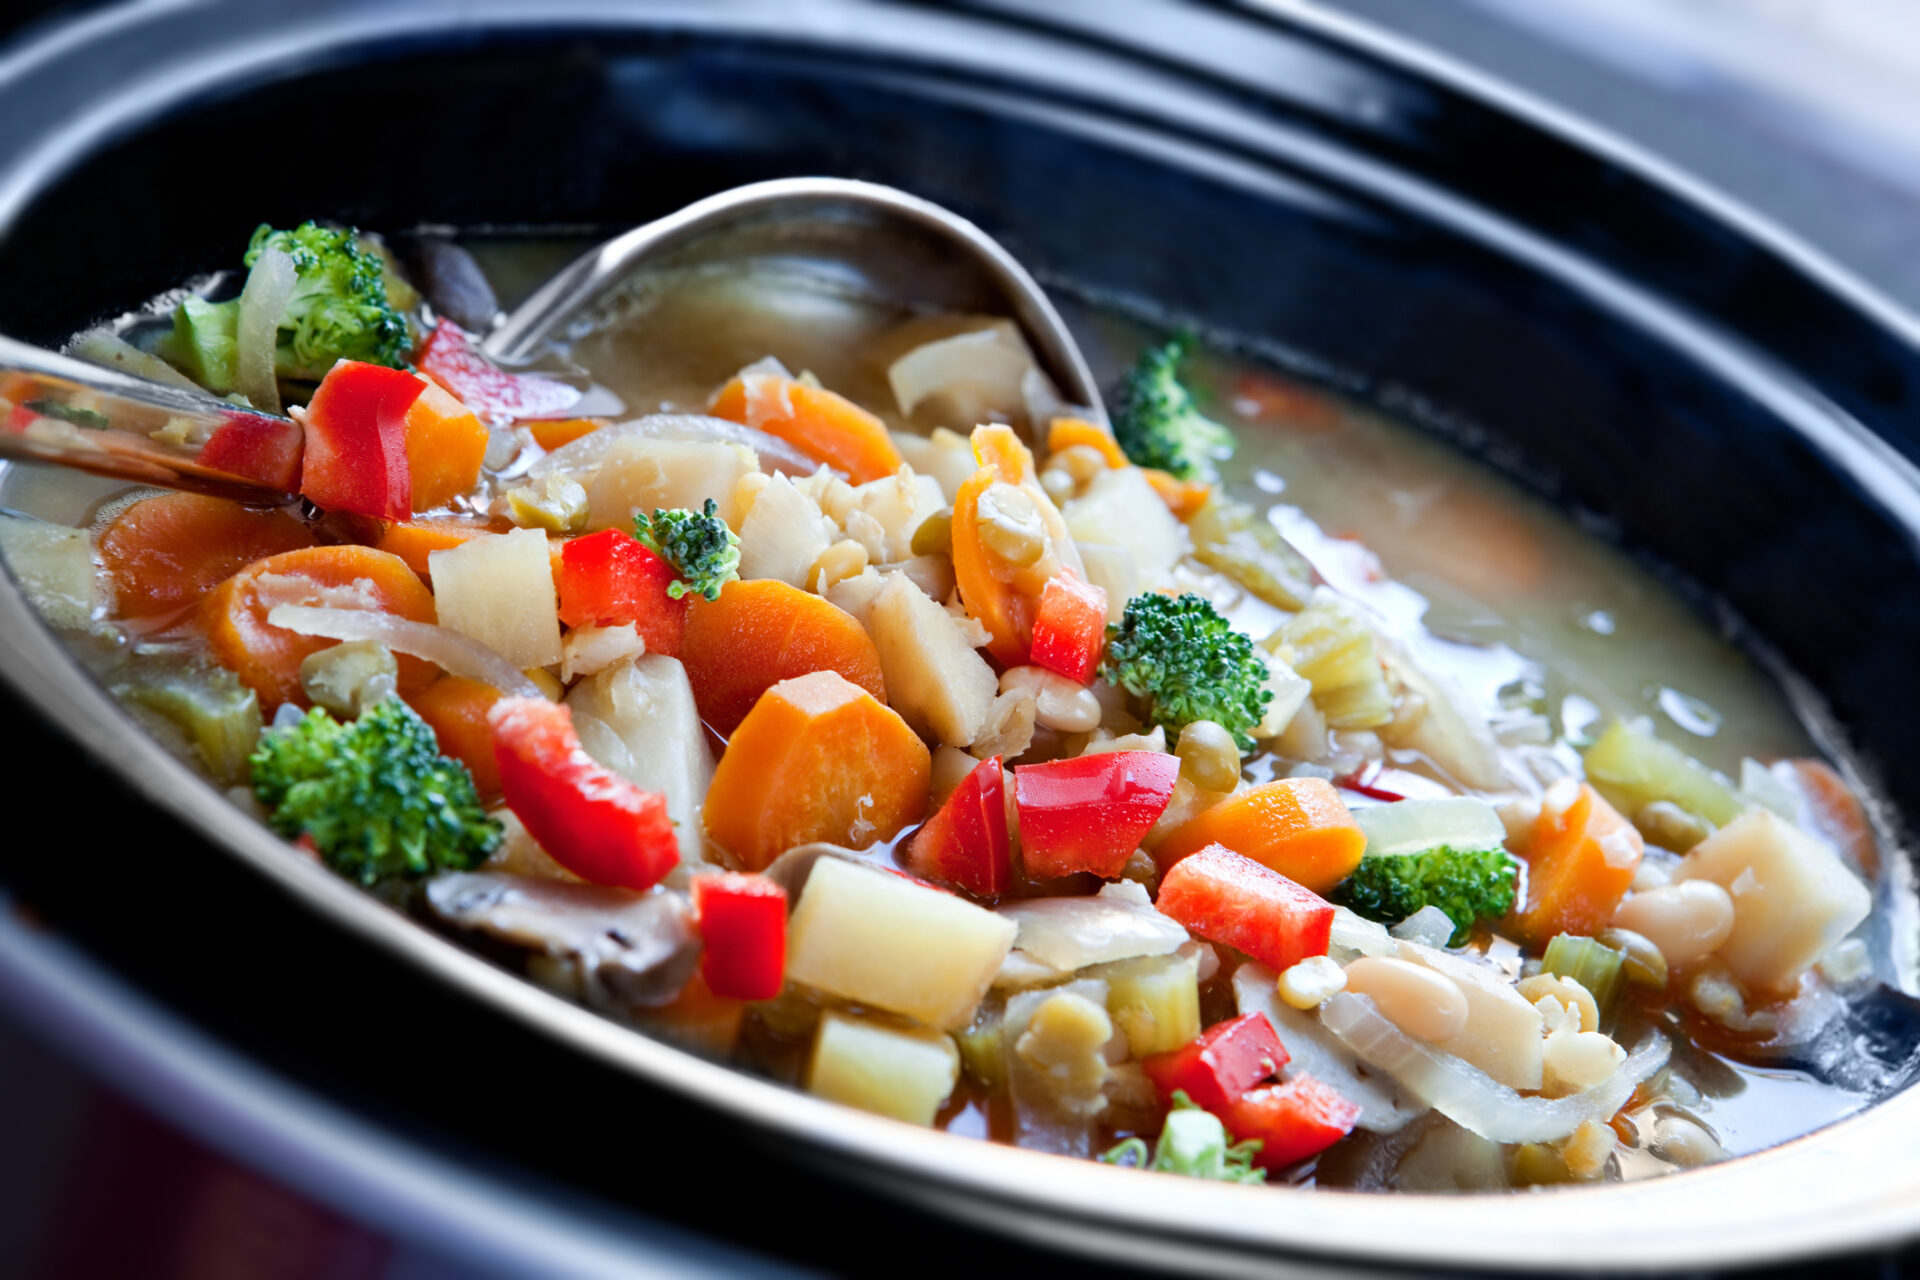 slow cooker recipes - soup